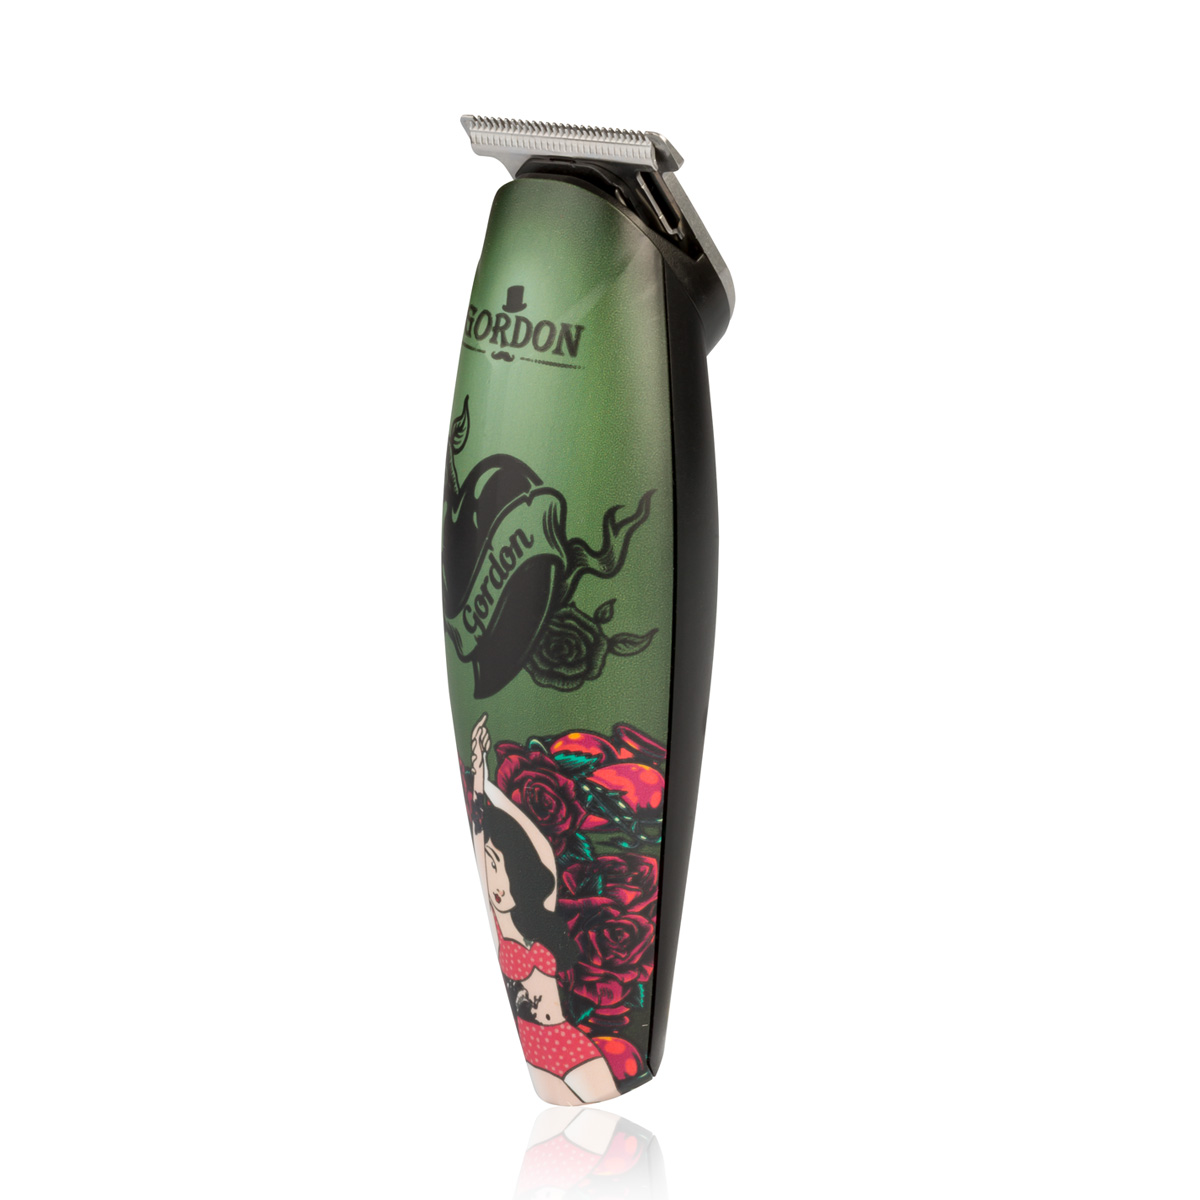 Trimmer μαλλιών Gordon Roses Limited Edition.